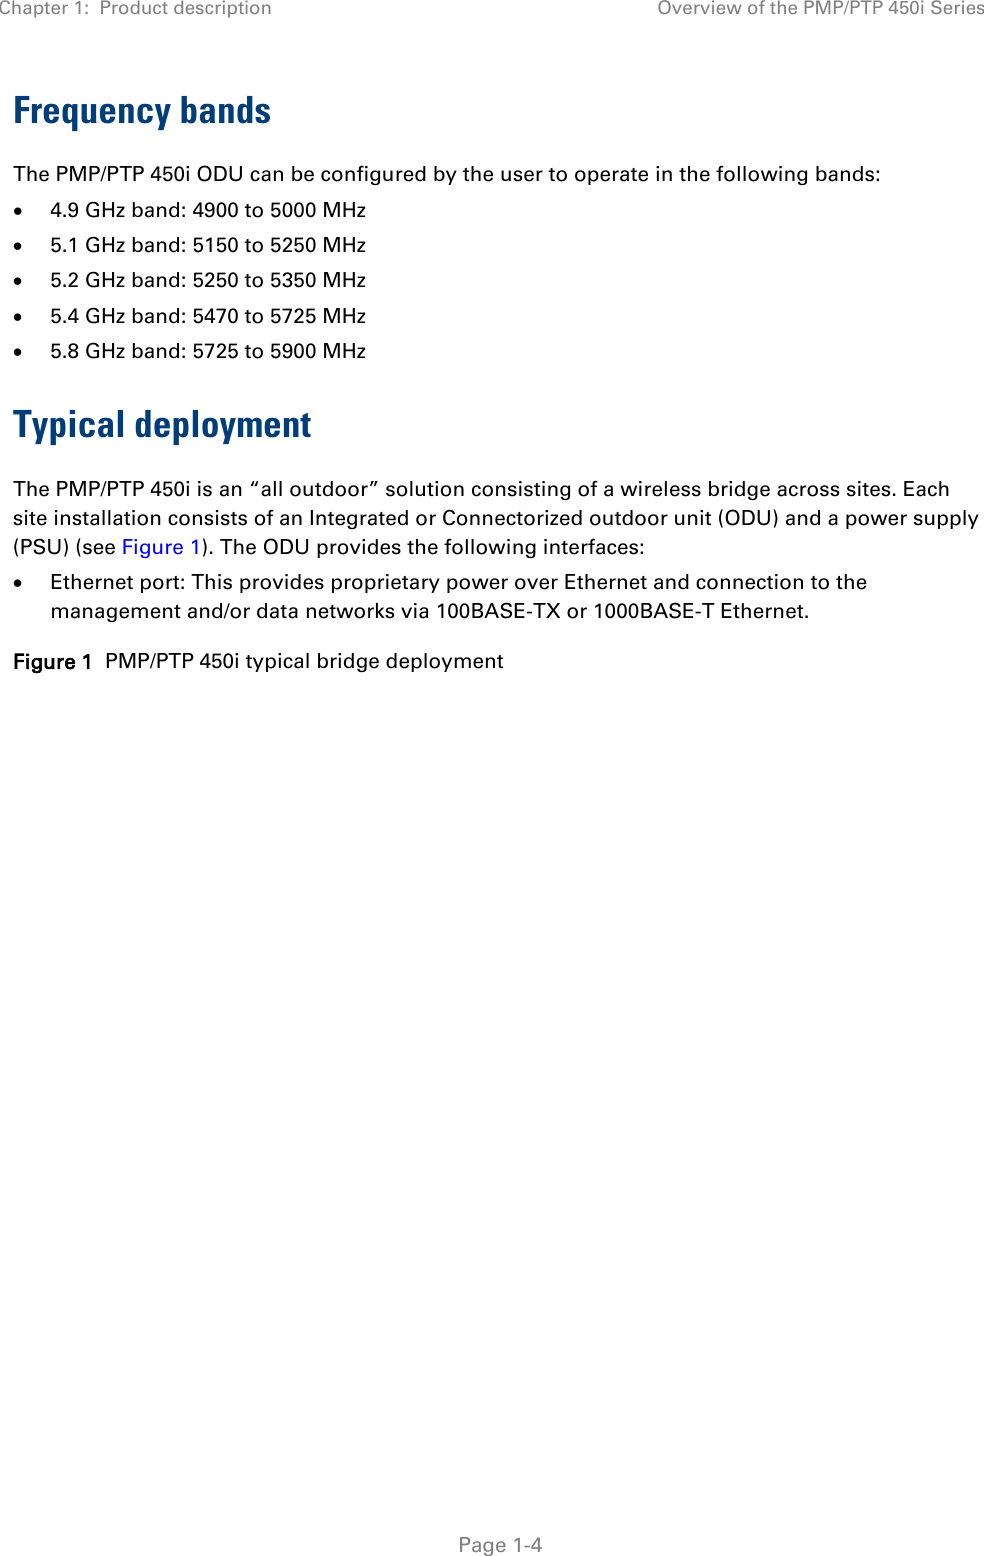 Chapter 1:  Product description Overview of the PMP/PTP 450i Series   Page 1-4 Frequency bands The PMP/PTP 450i ODU can be configured by the user to operate in the following bands: • 4.9 GHz band: 4900 to 5000 MHz • 5.1 GHz band: 5150 to 5250 MHz • 5.2 GHz band: 5250 to 5350 MHz • 5.4 GHz band: 5470 to 5725 MHz • 5.8 GHz band: 5725 to 5900 MHz Typical deployment The PMP/PTP 450i is an “all outdoor” solution consisting of a wireless bridge across sites. Each site installation consists of an Integrated or Connectorized outdoor unit (ODU) and a power supply (PSU) (see Figure 1). The ODU provides the following interfaces: • Ethernet port: This provides proprietary power over Ethernet and connection to the management and/or data networks via 100BASE-TX or 1000BASE-T Ethernet. Figure 1  PMP/PTP 450i typical bridge deployment  